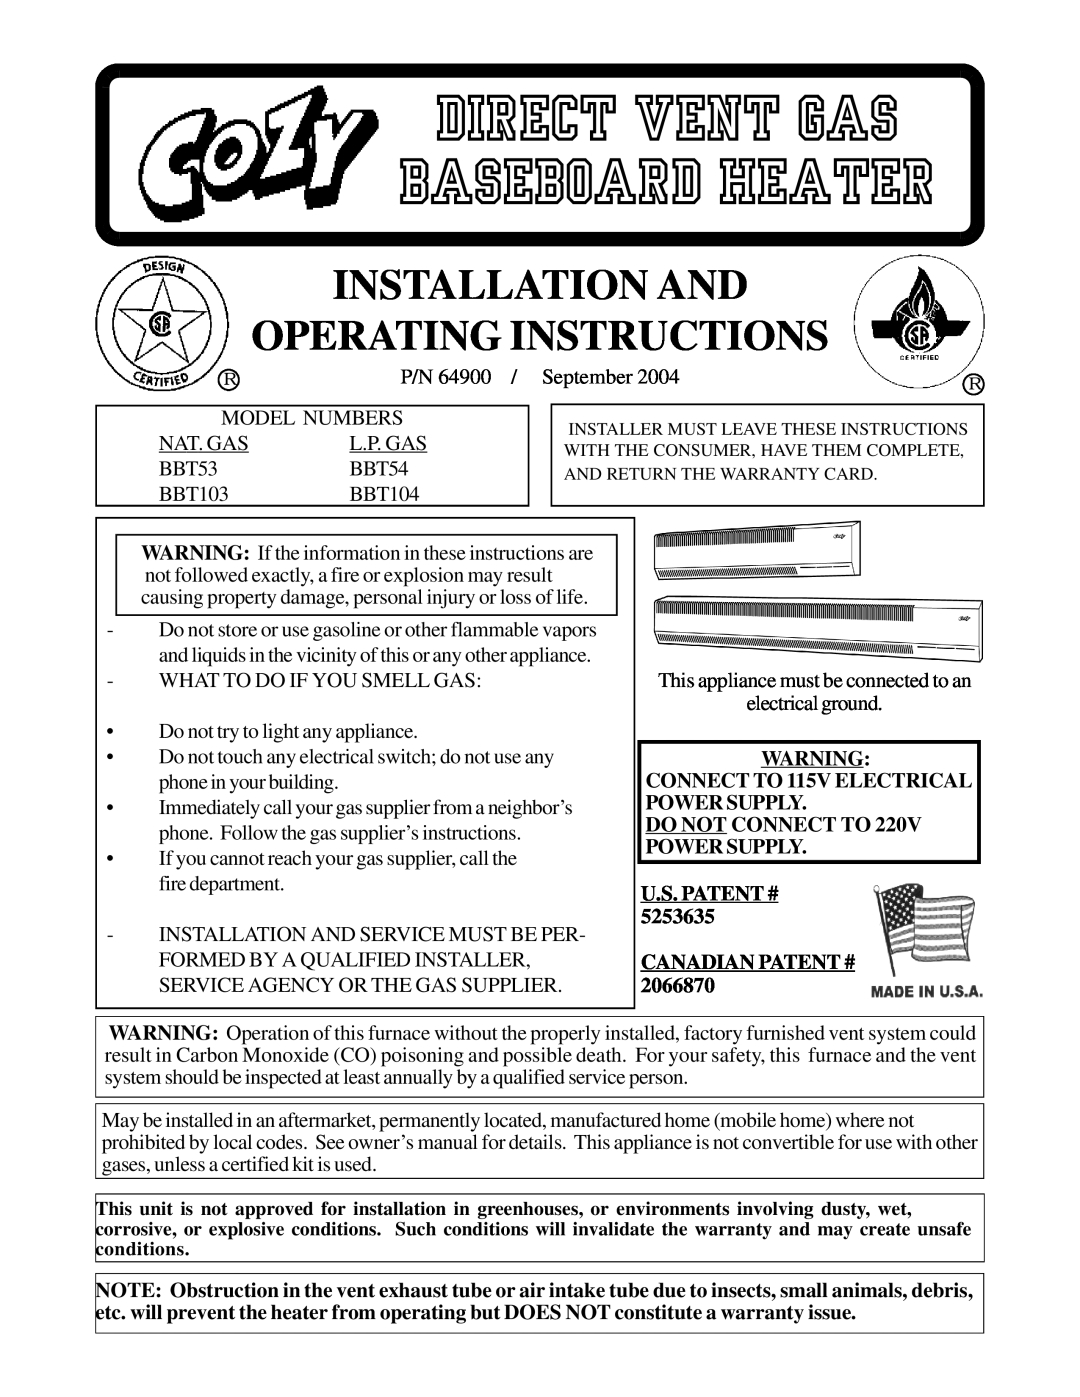 Louisville Tin and Stove BBT103, BBT53 warranty Installation And Operating Instructions, Direct Vent Gas Baseboard Heater 